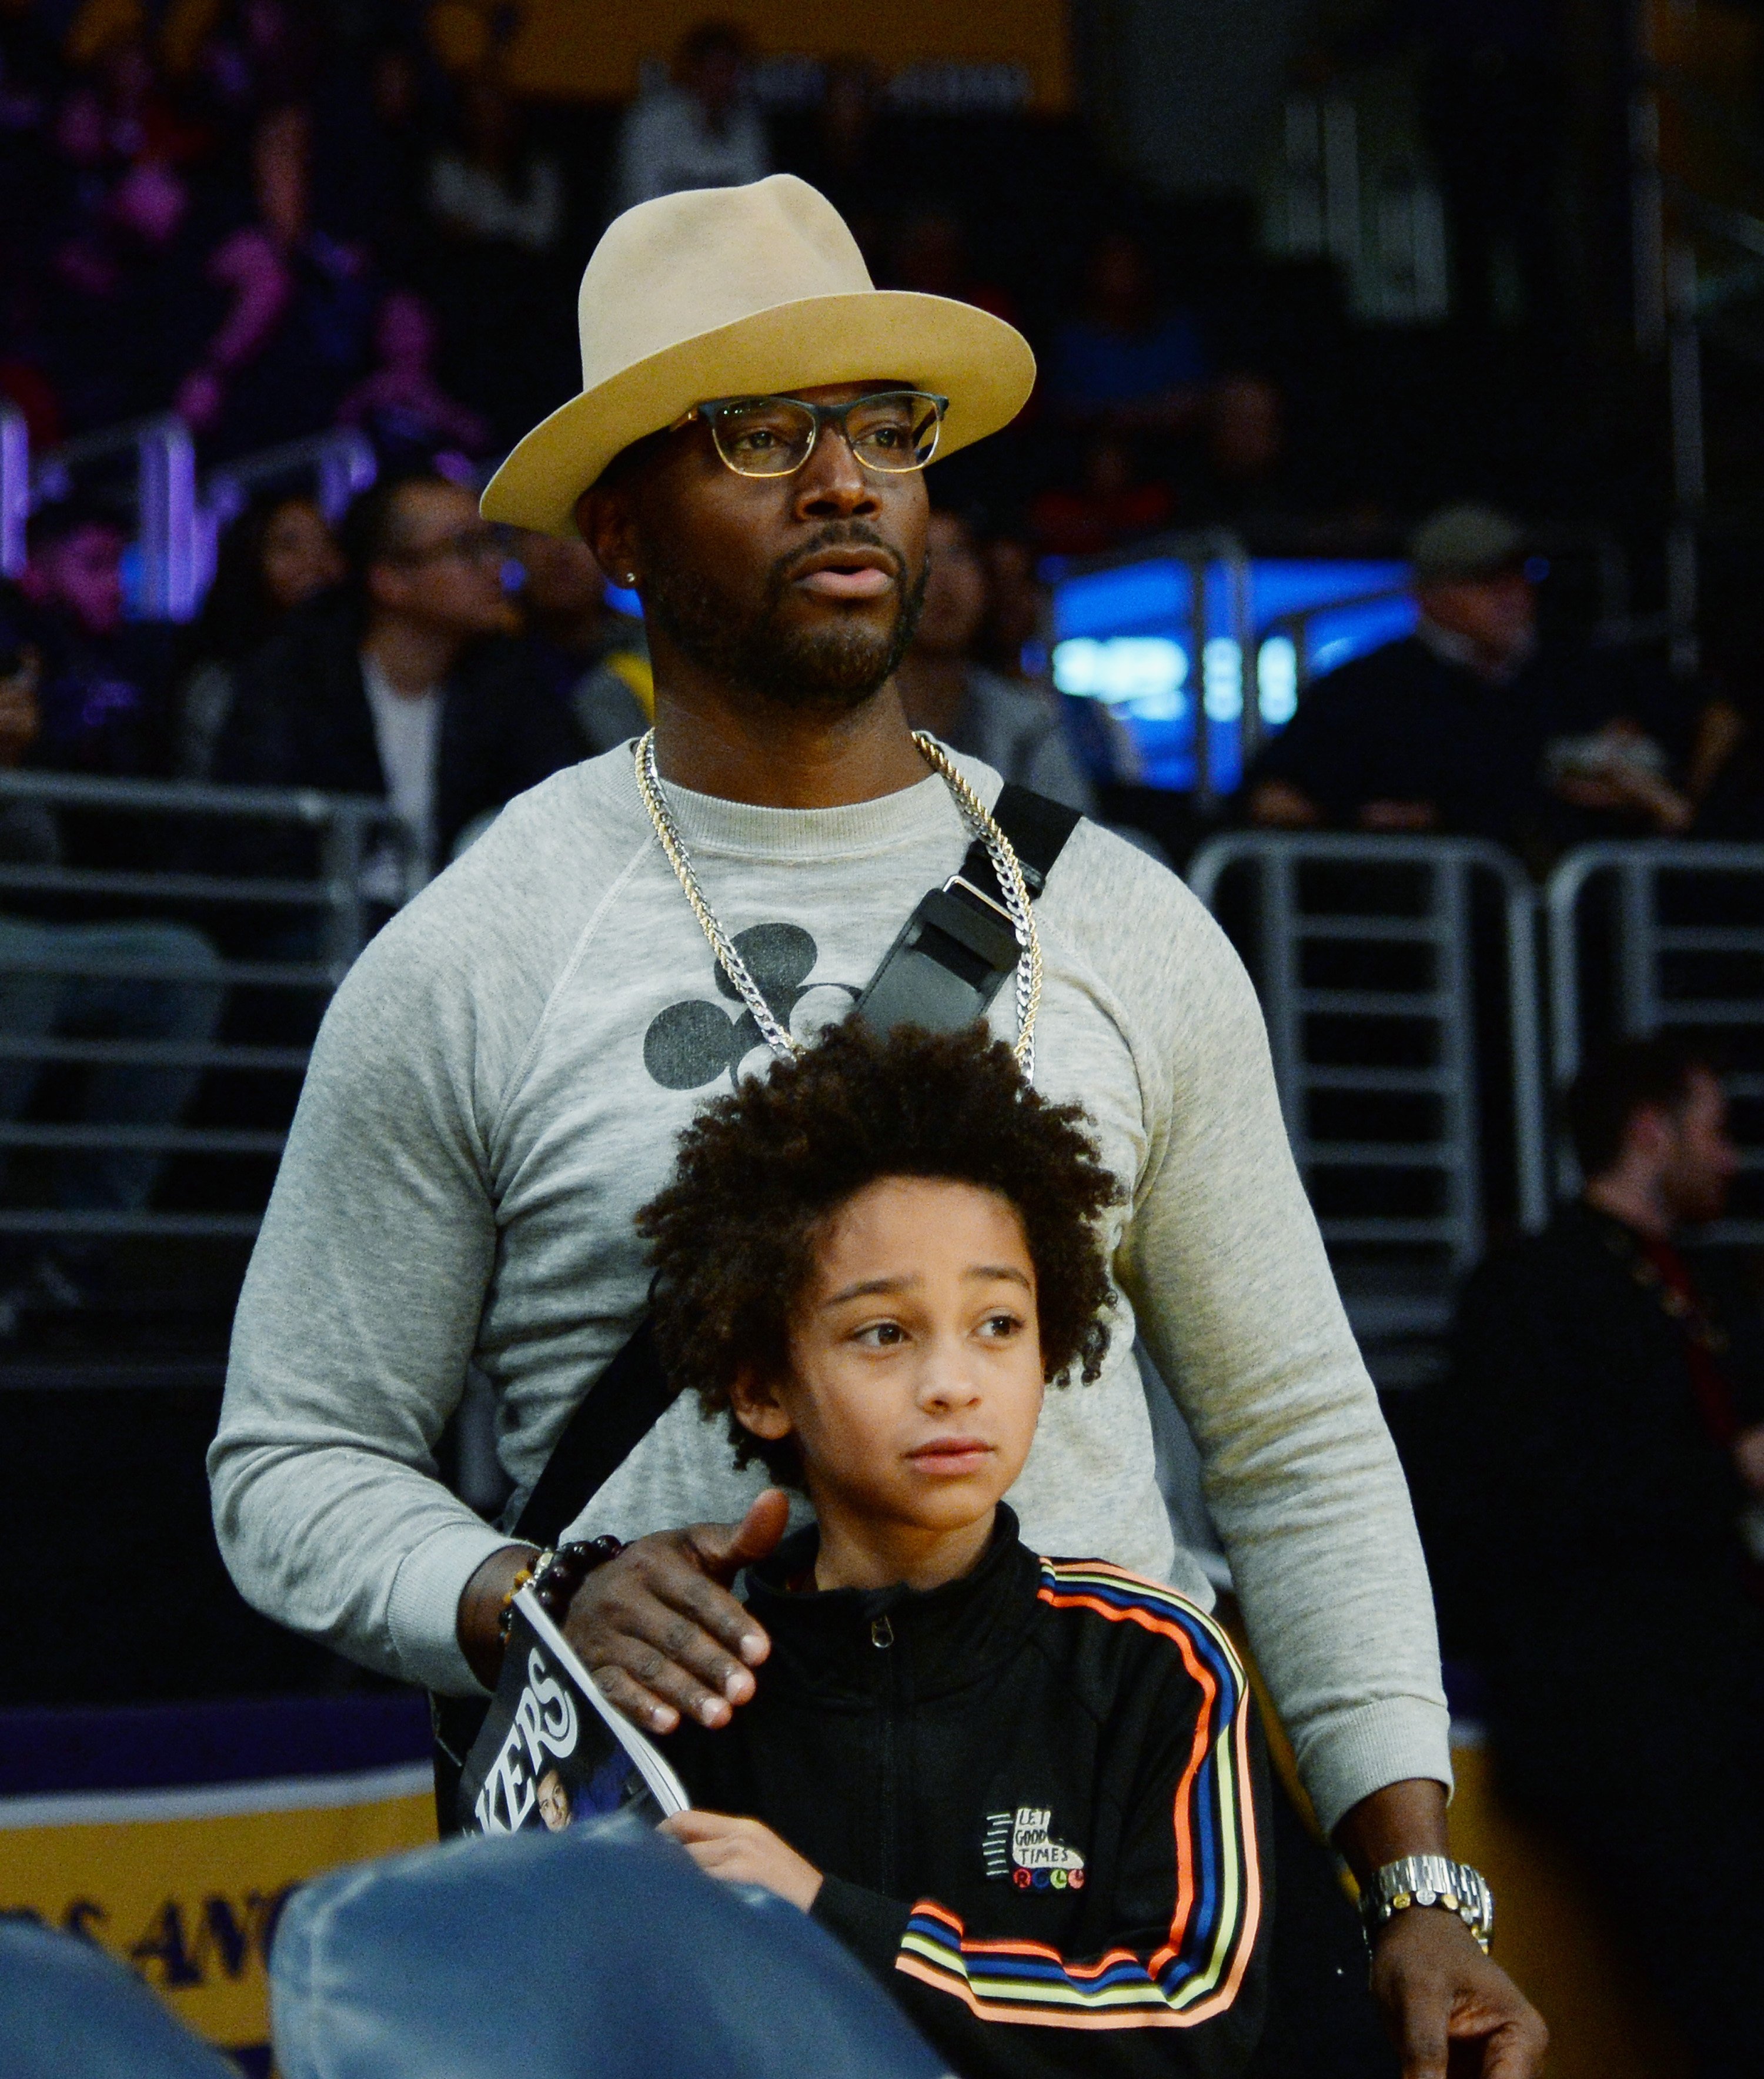  Taye Diggs and Walker Diggs at a basketball game between the Indiana Pacers and Los Angeles Lakers on January 19, 2018, in California. | Source: Getty Images